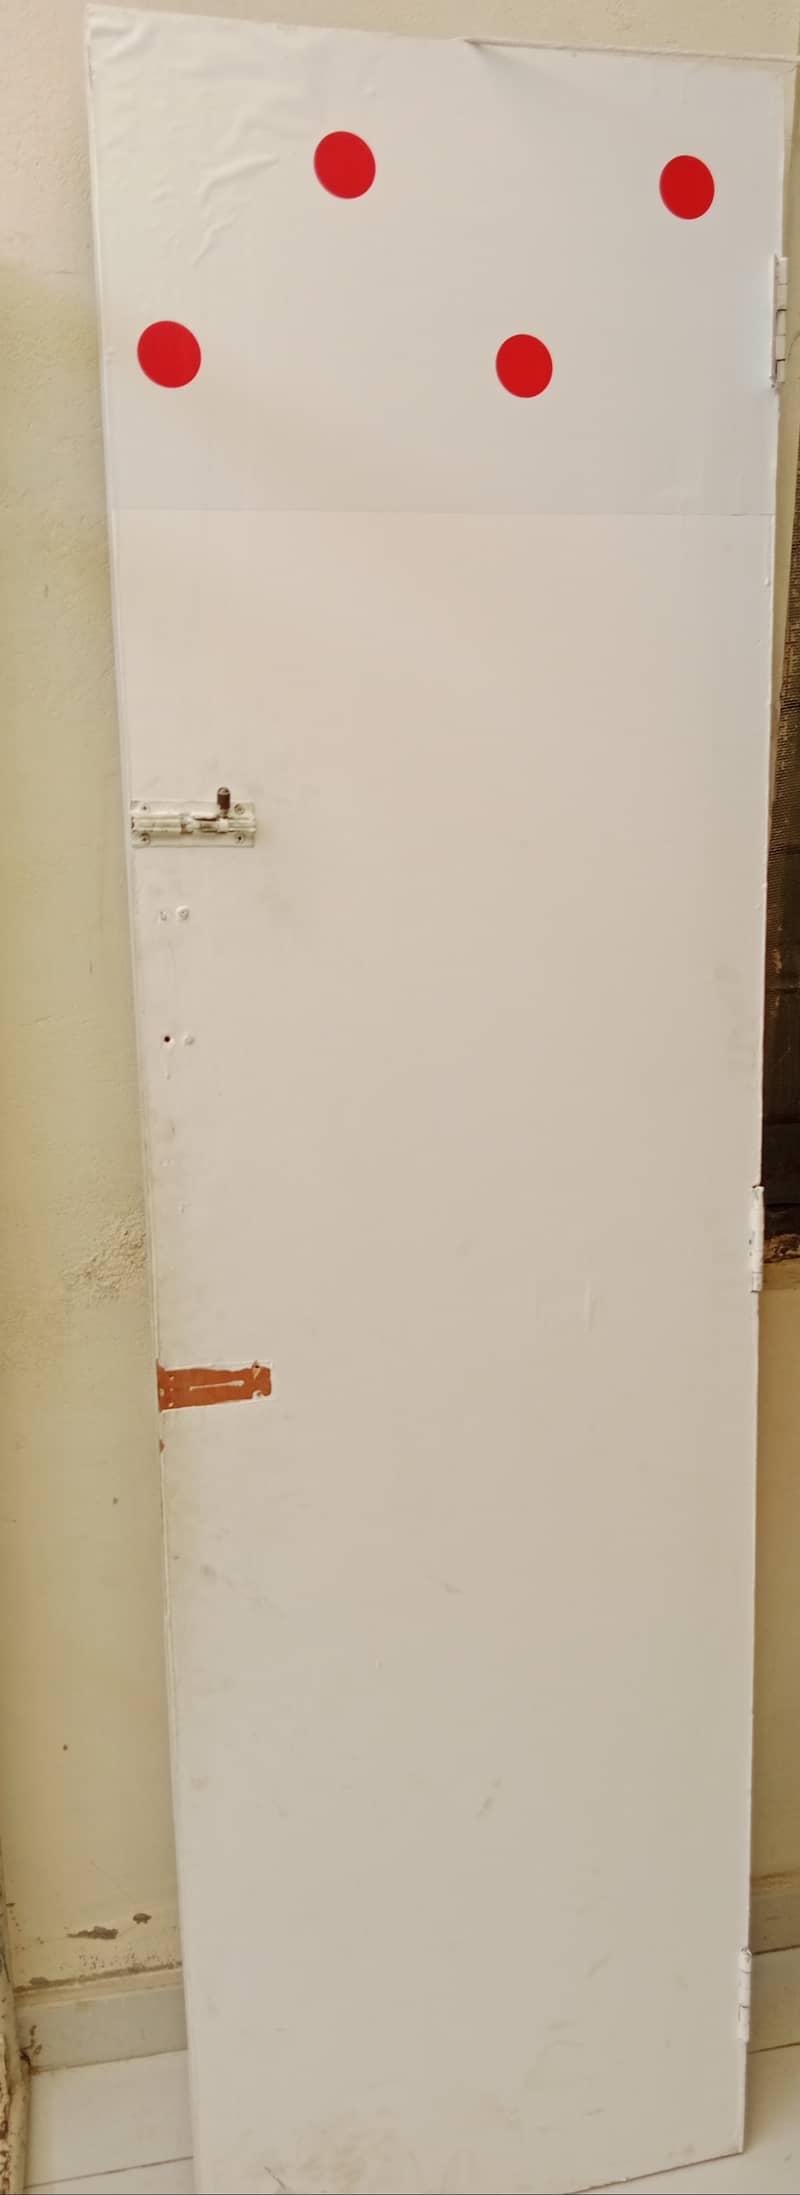 Door for sale neat and clean only WhatsUp 03060103003 17